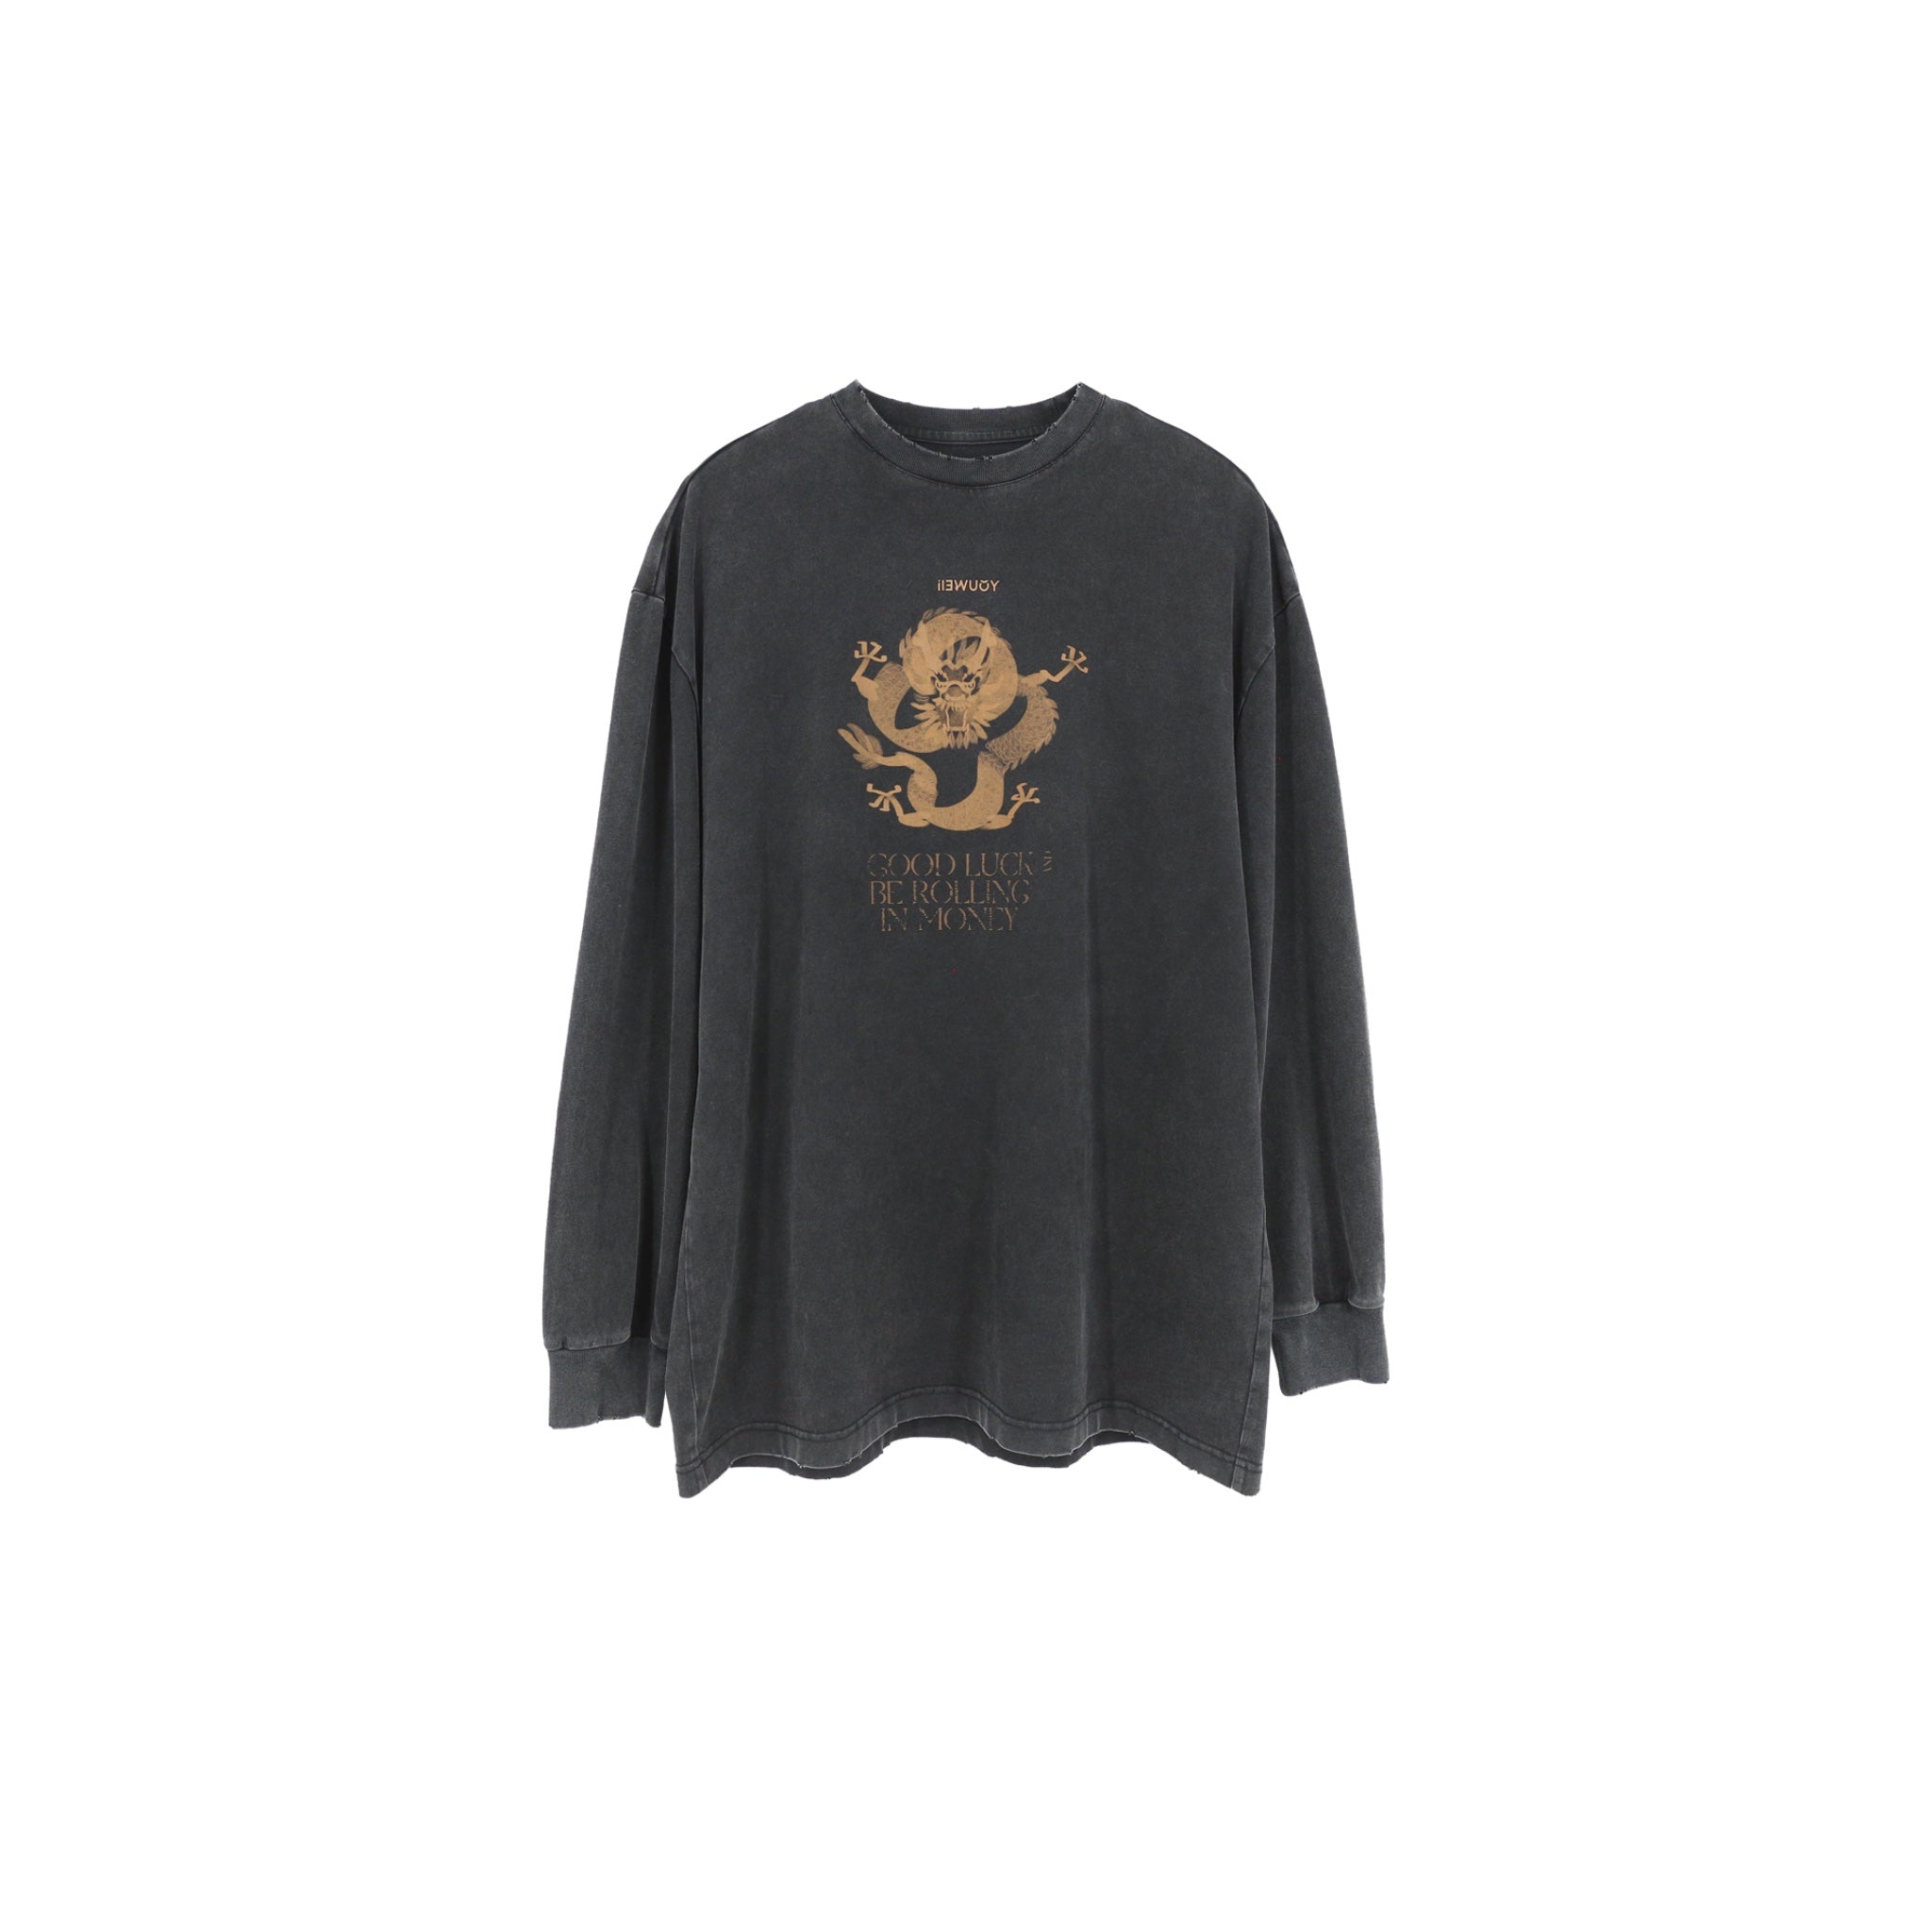 ilEWUOY Distressed Washed Printed Long-sleeved T-shirt in Black | MADA IN CHINA